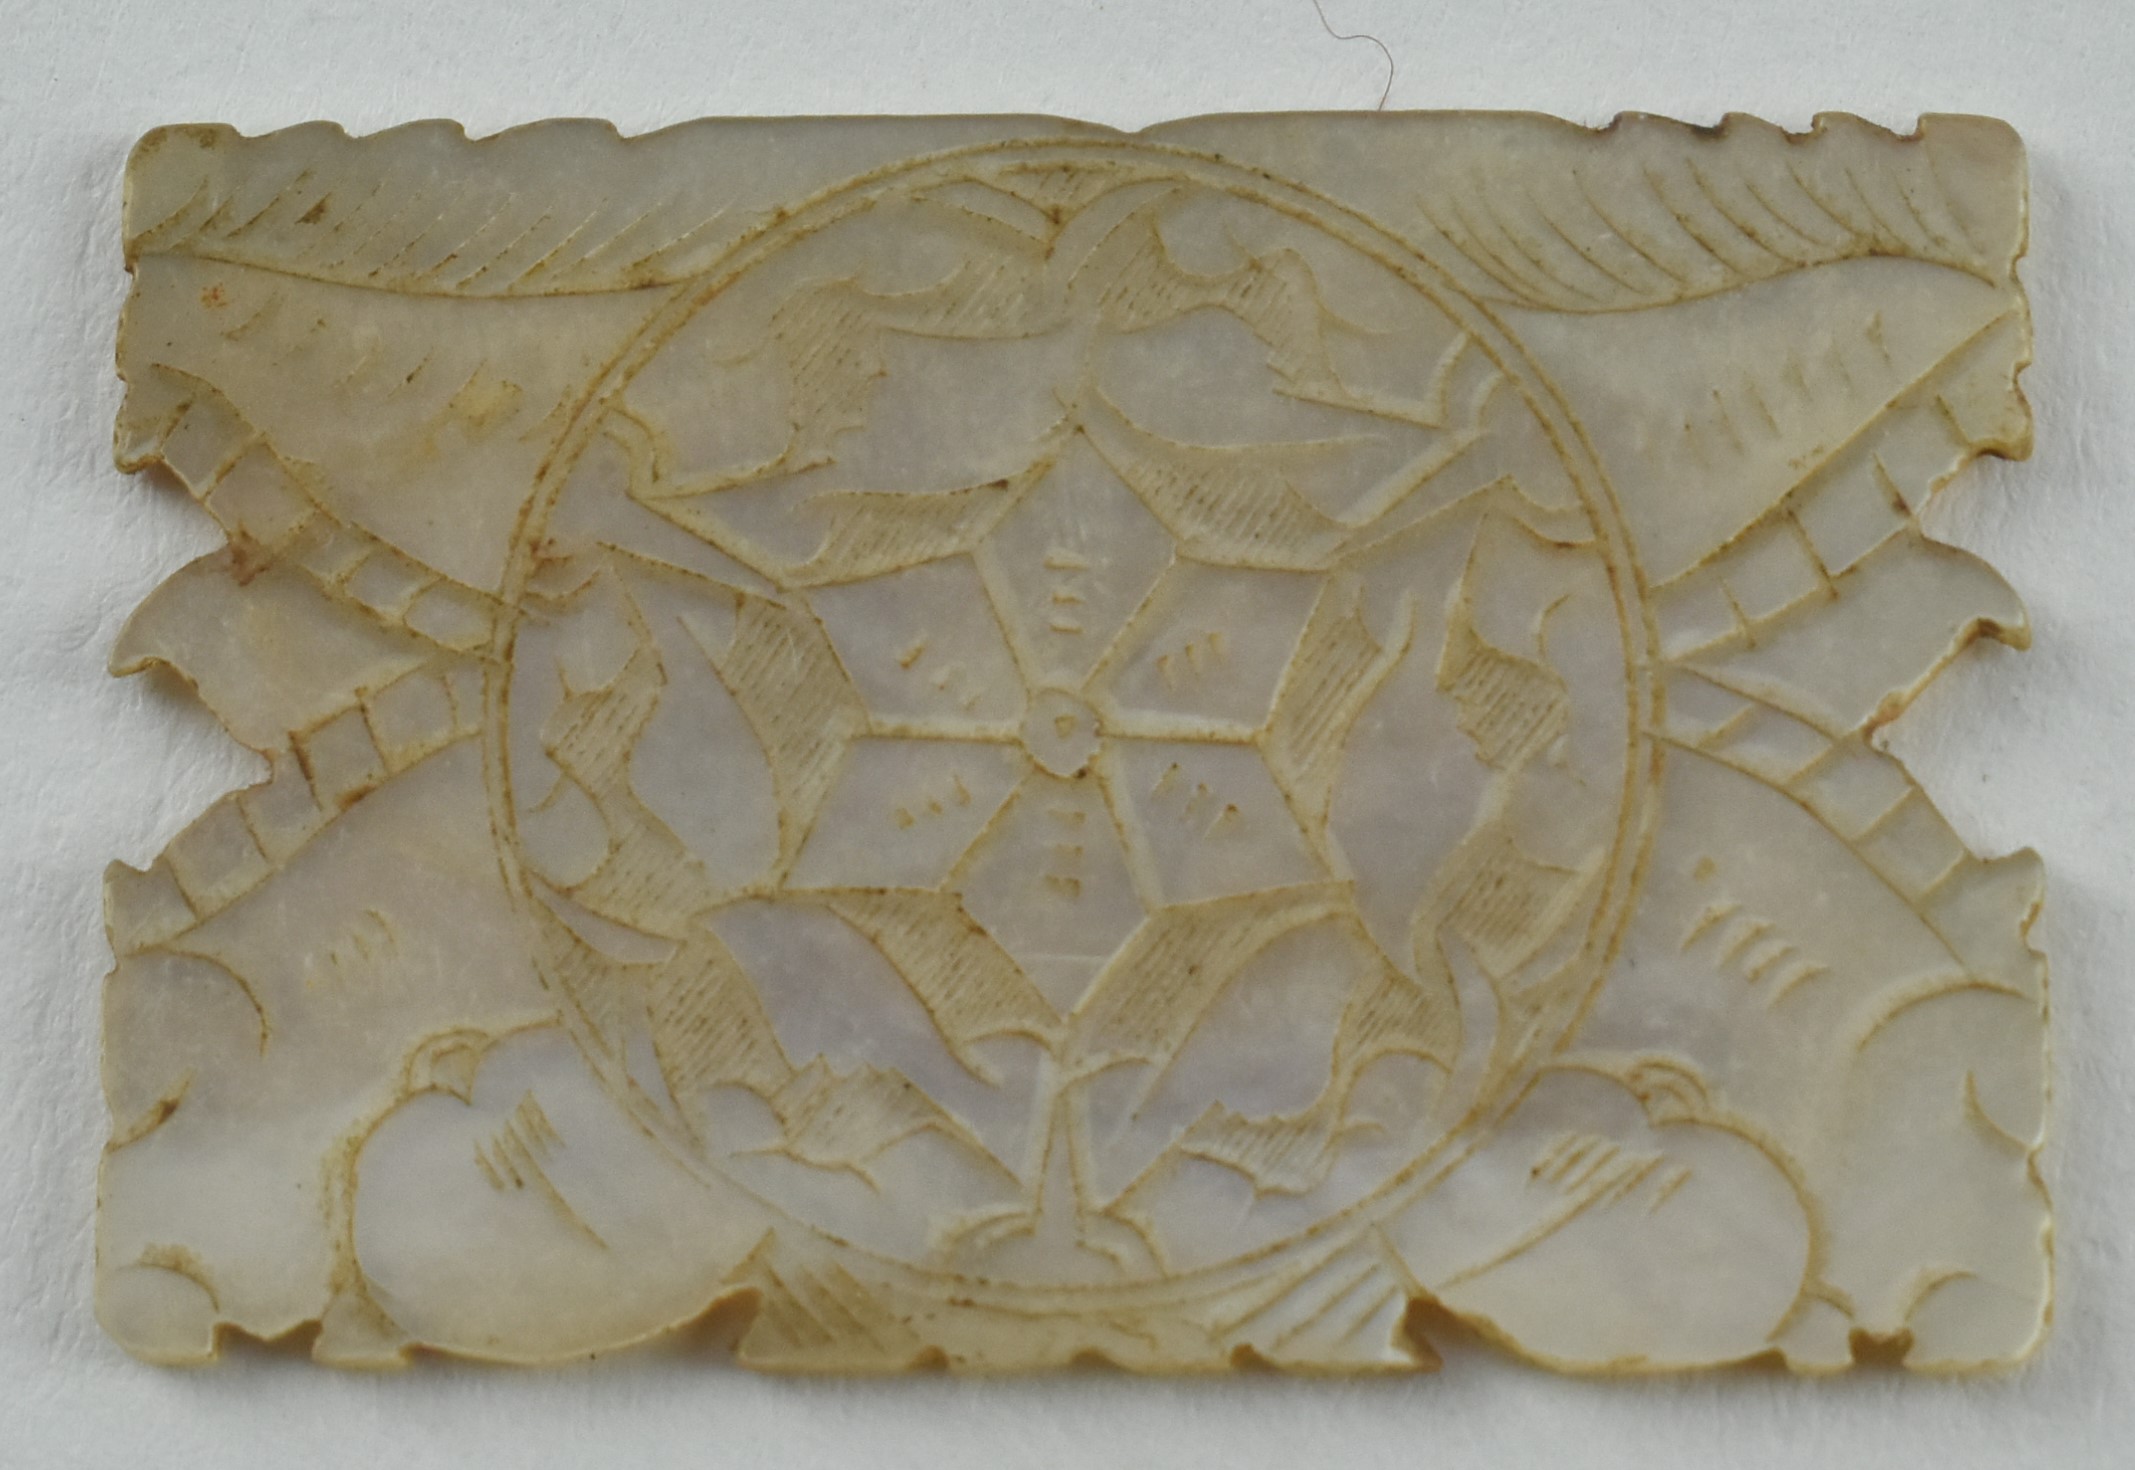 QING DYNASTY MOTHER OF PEARL GAMING TOKENS 清十三行贝母筹码 - Image 7 of 11